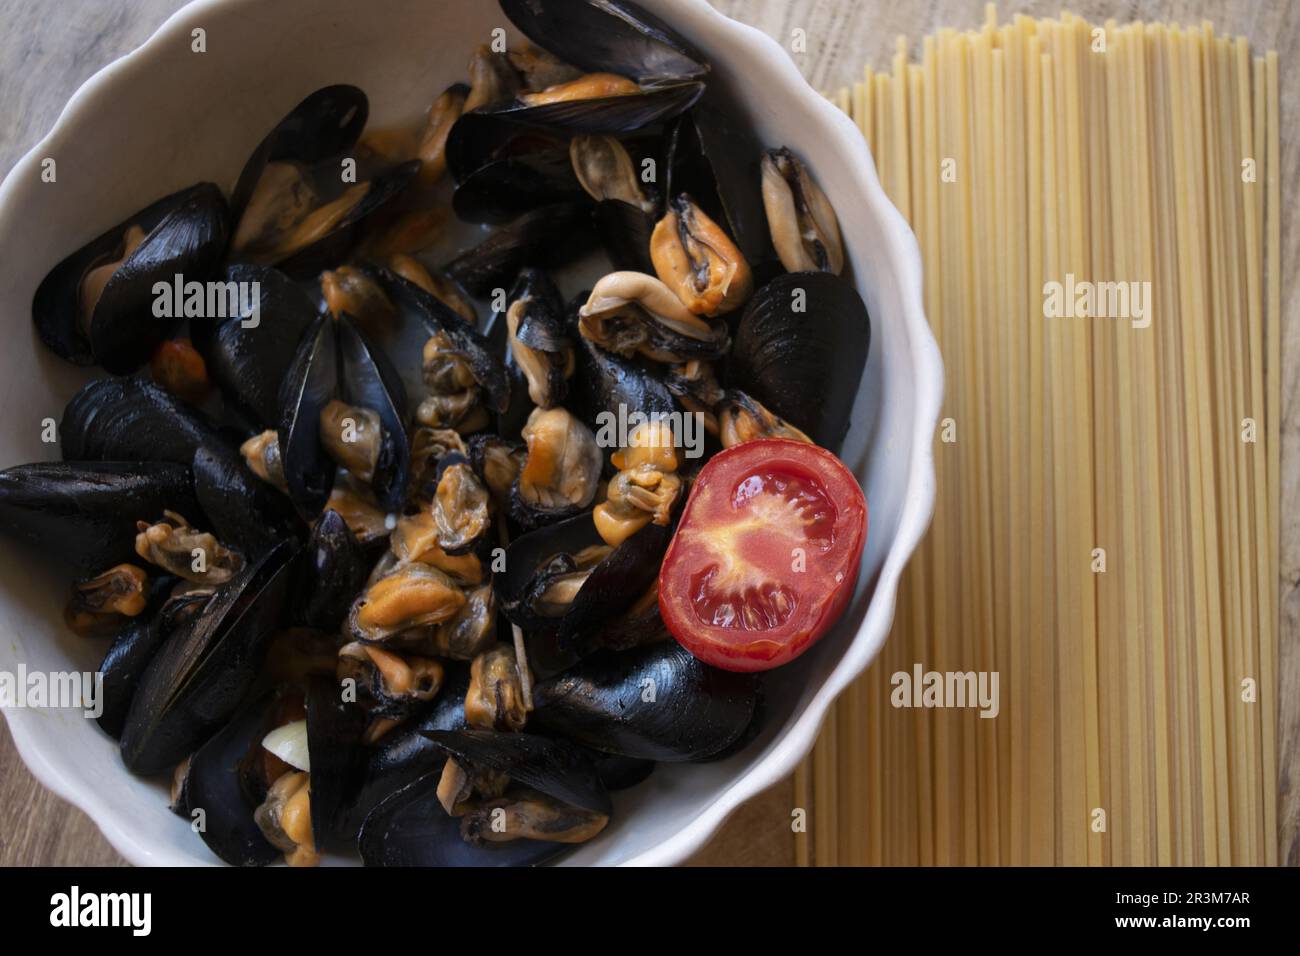 fish first course typical of italian cuisine: pasta with mussels and freshn tomato Stock Photo